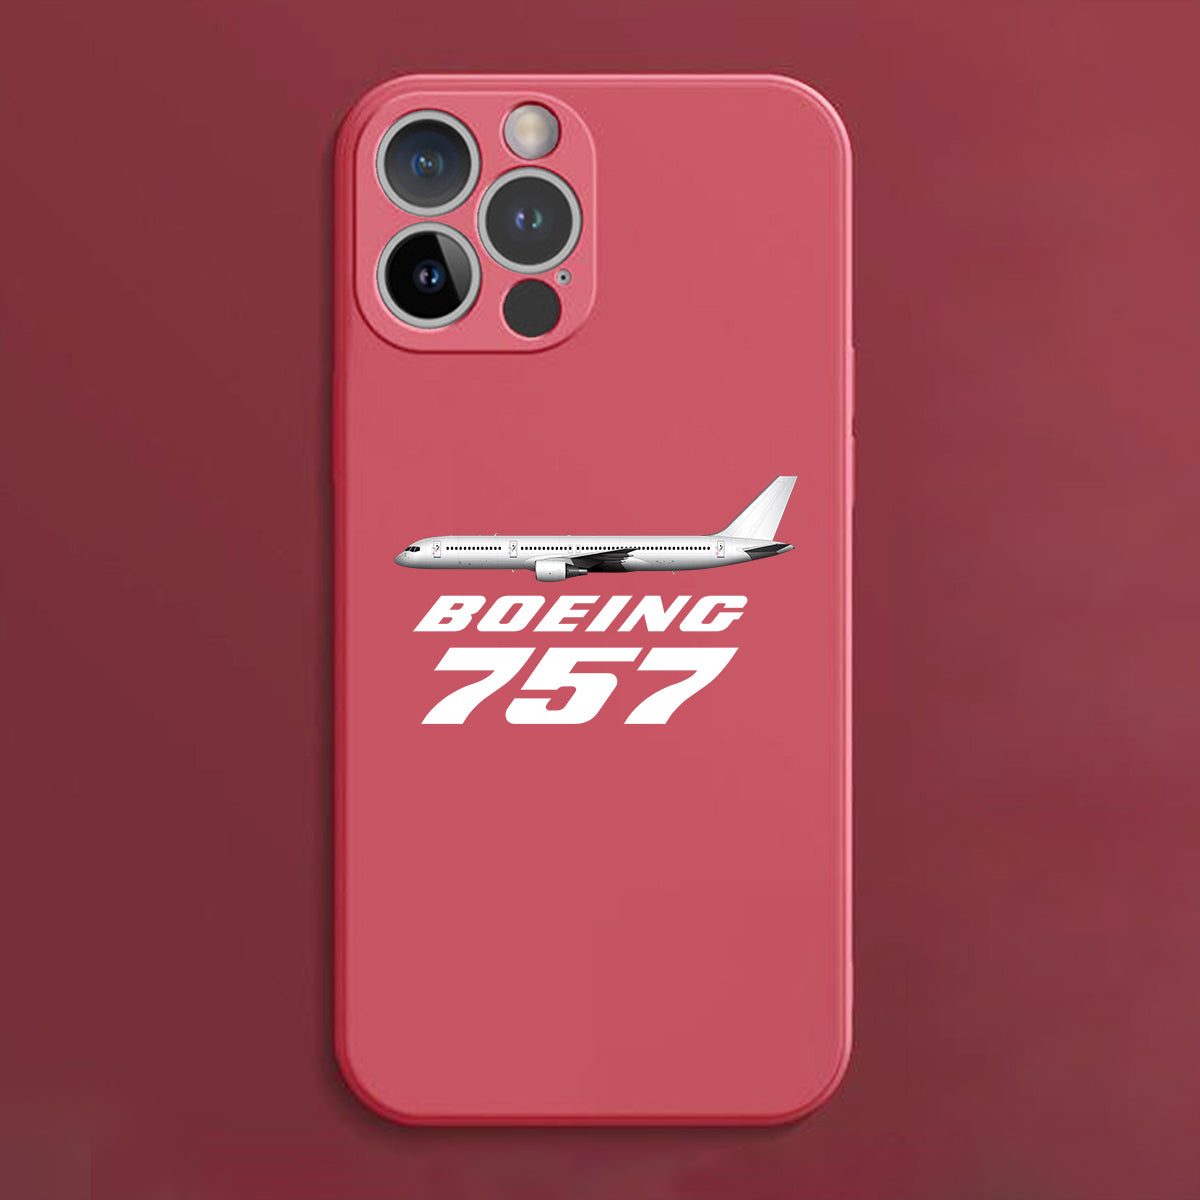 The Boeing 757 Designed Soft Silicone iPhone Cases